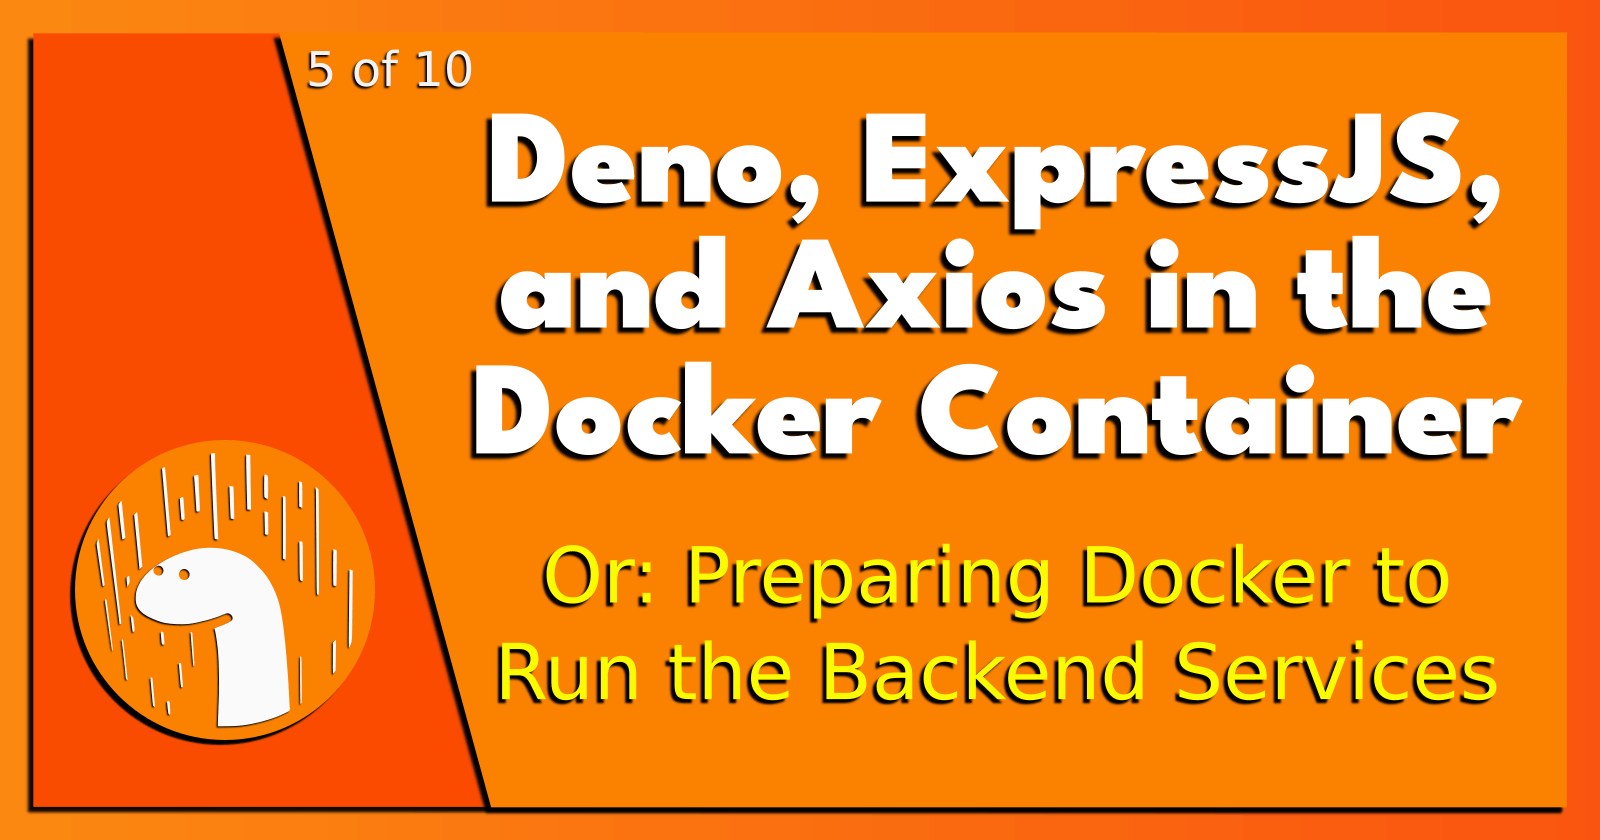 5 of 10: Deno, ExpressJS, and Axios in the Docker Container.